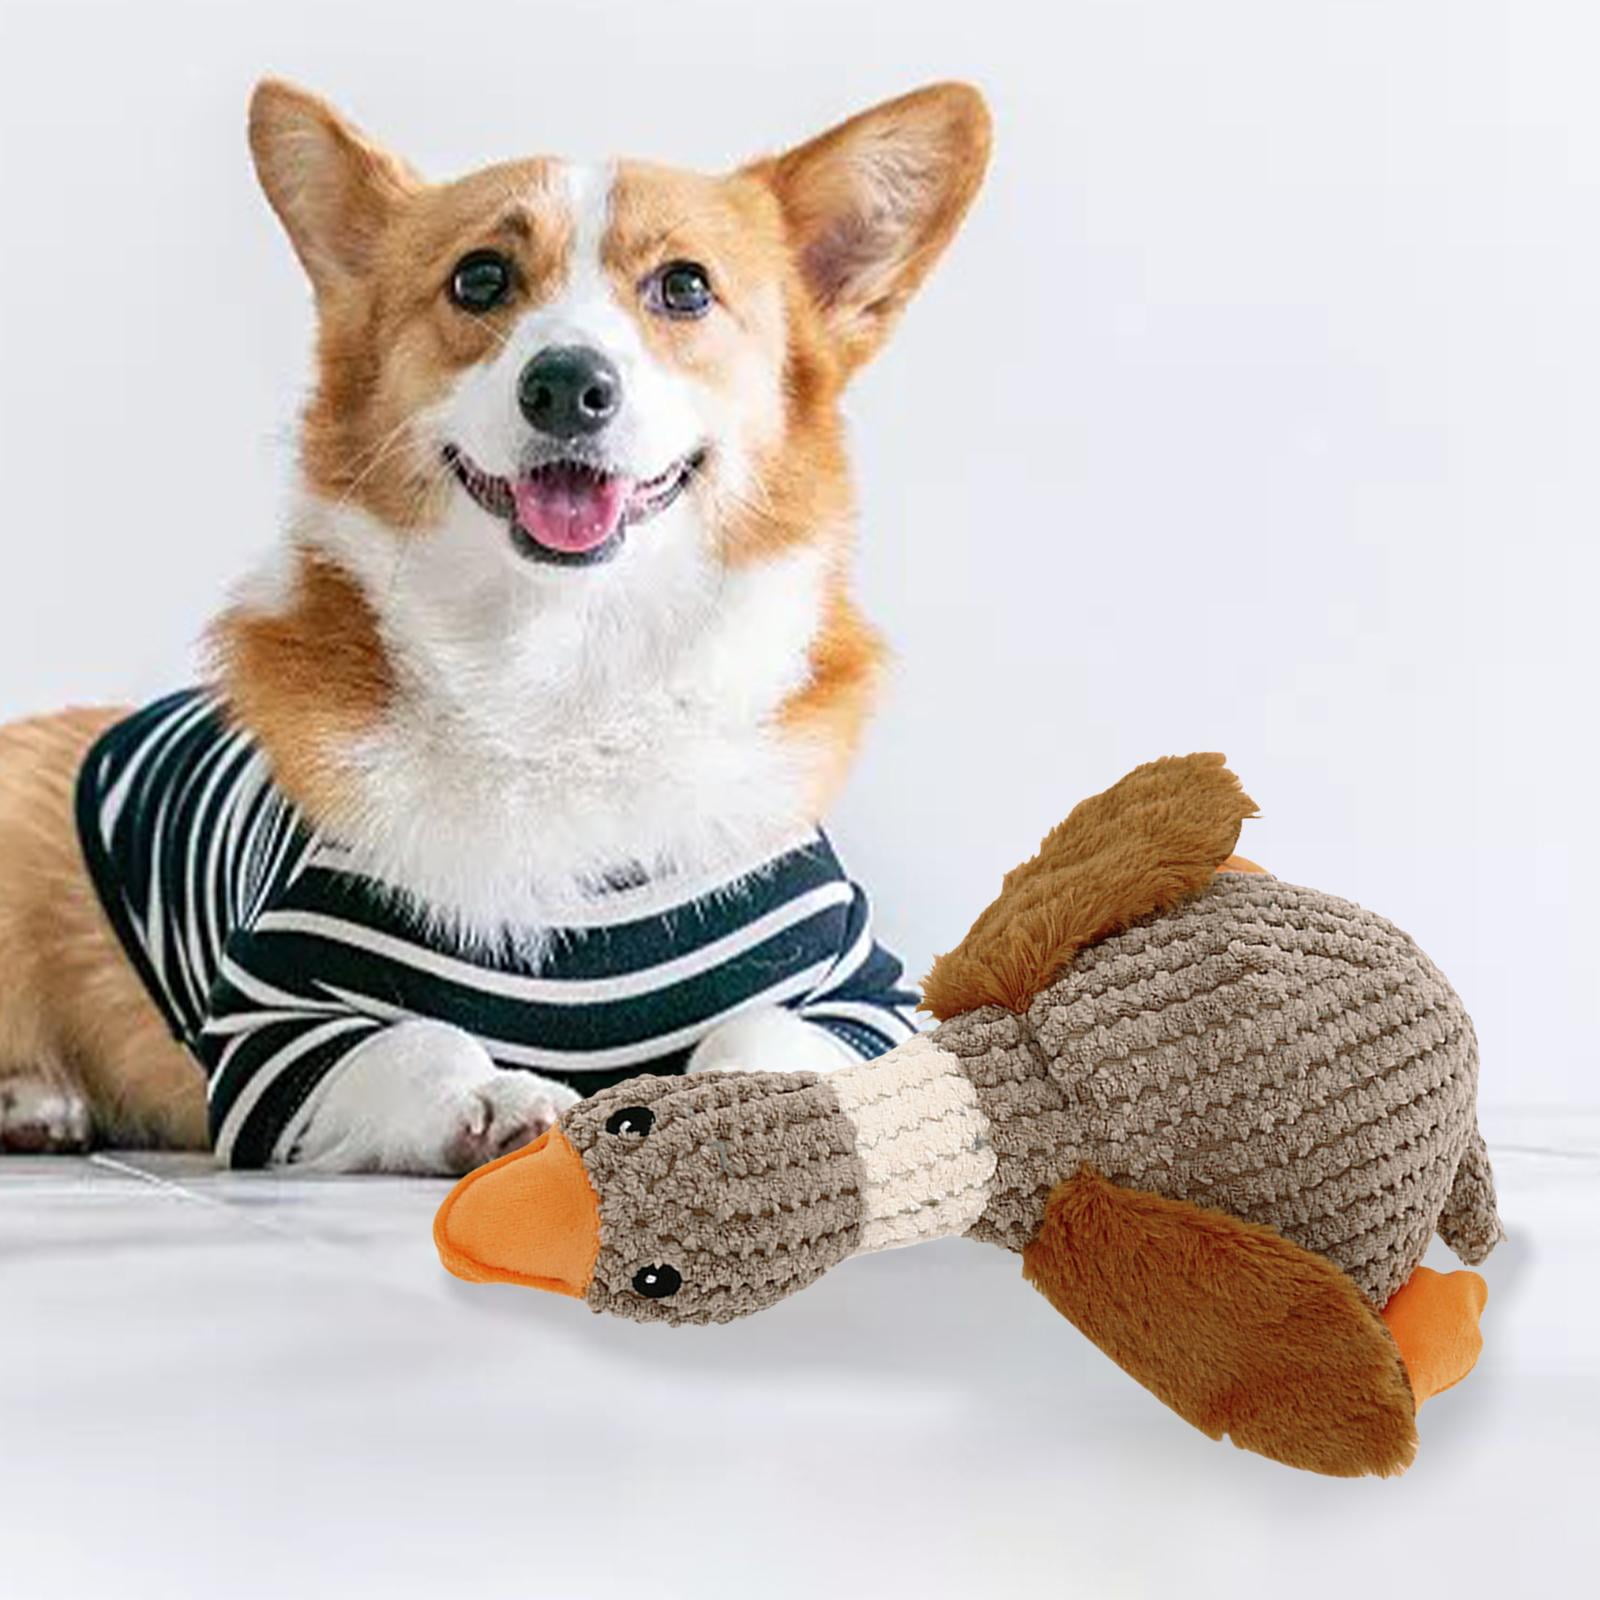 Squeaky Plush Snuffle Alligator Dog Toy For IQ Training And Foraging  Perfect For Small, Medium, And Large Dogs Pet Products 230520 From Hu10,  $10.6